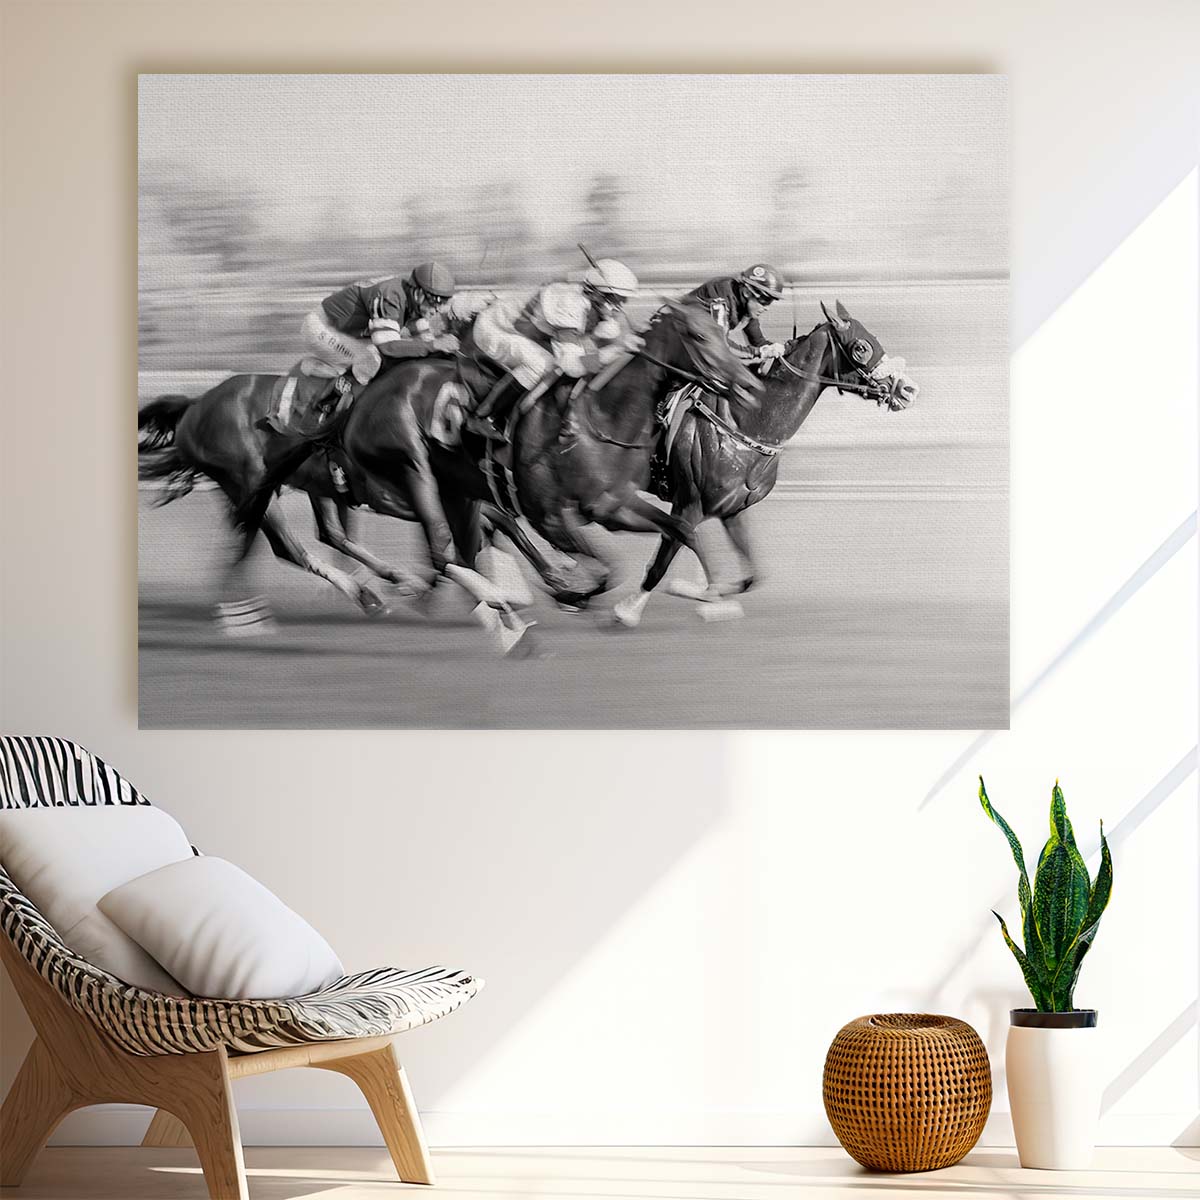 Dynamic Equestrian Race Speed & Motion Wall Art by Luxuriance Designs. Made in USA.